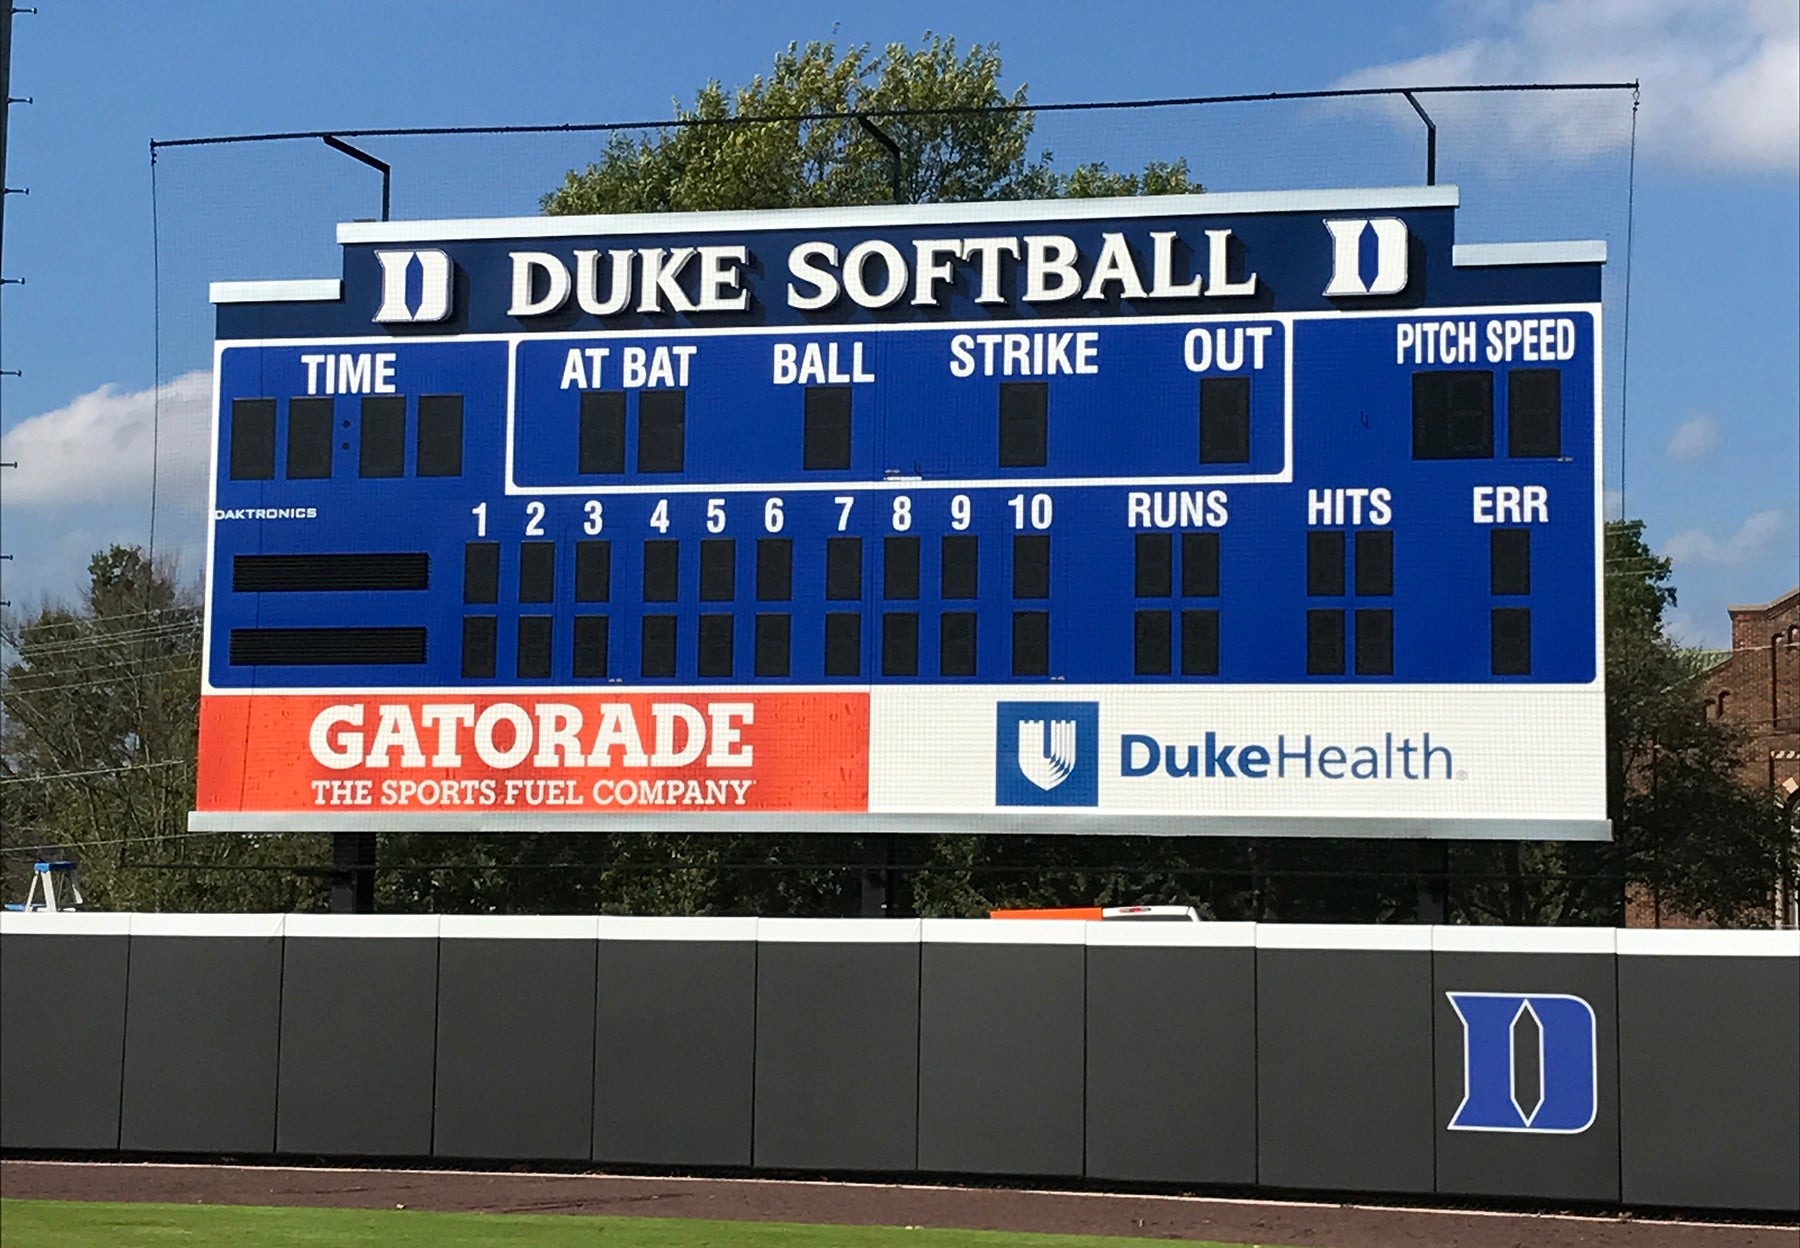 A large blue scoreboard with the duke softball team on it.